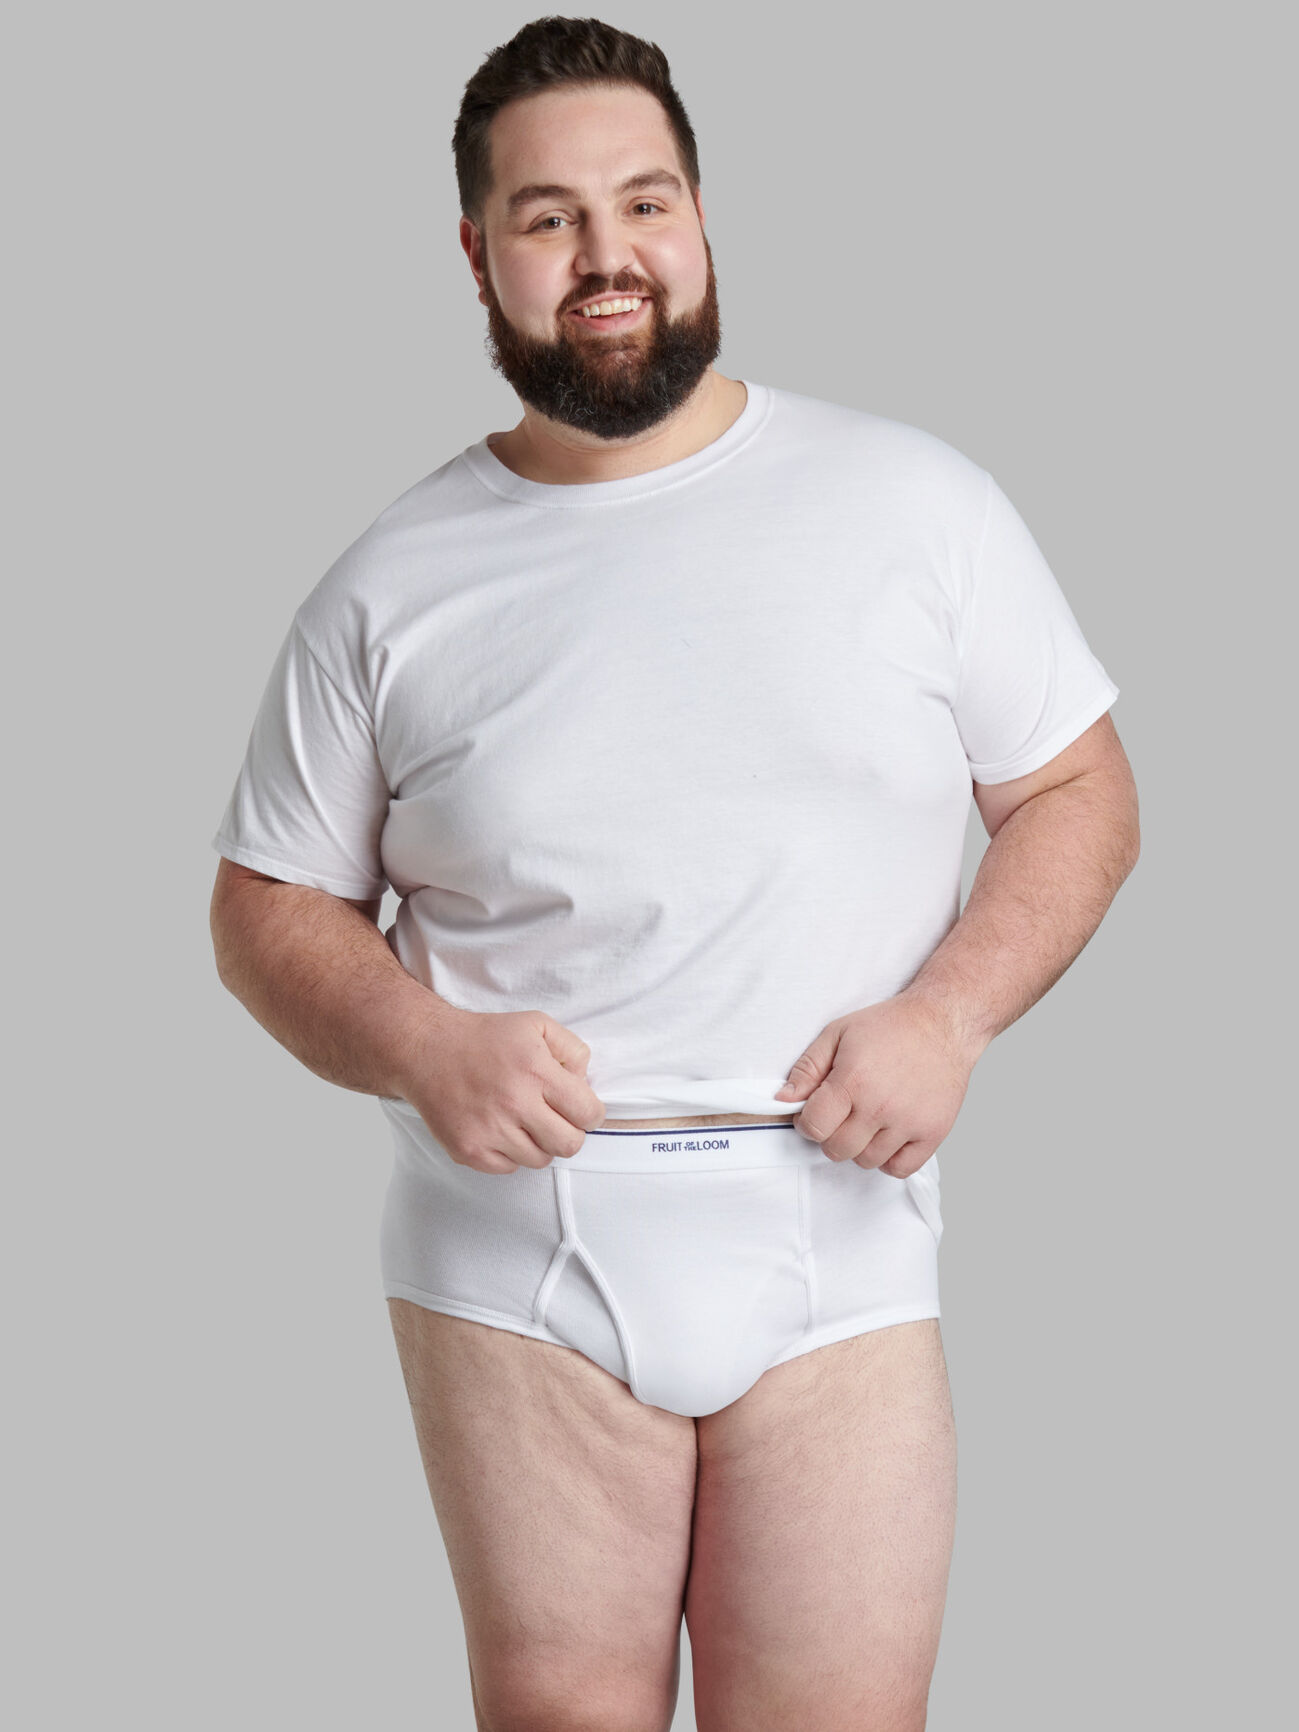 Fruit of the Loom Men's Brief 3 Pack, White, XXX-Large(Pack of 3